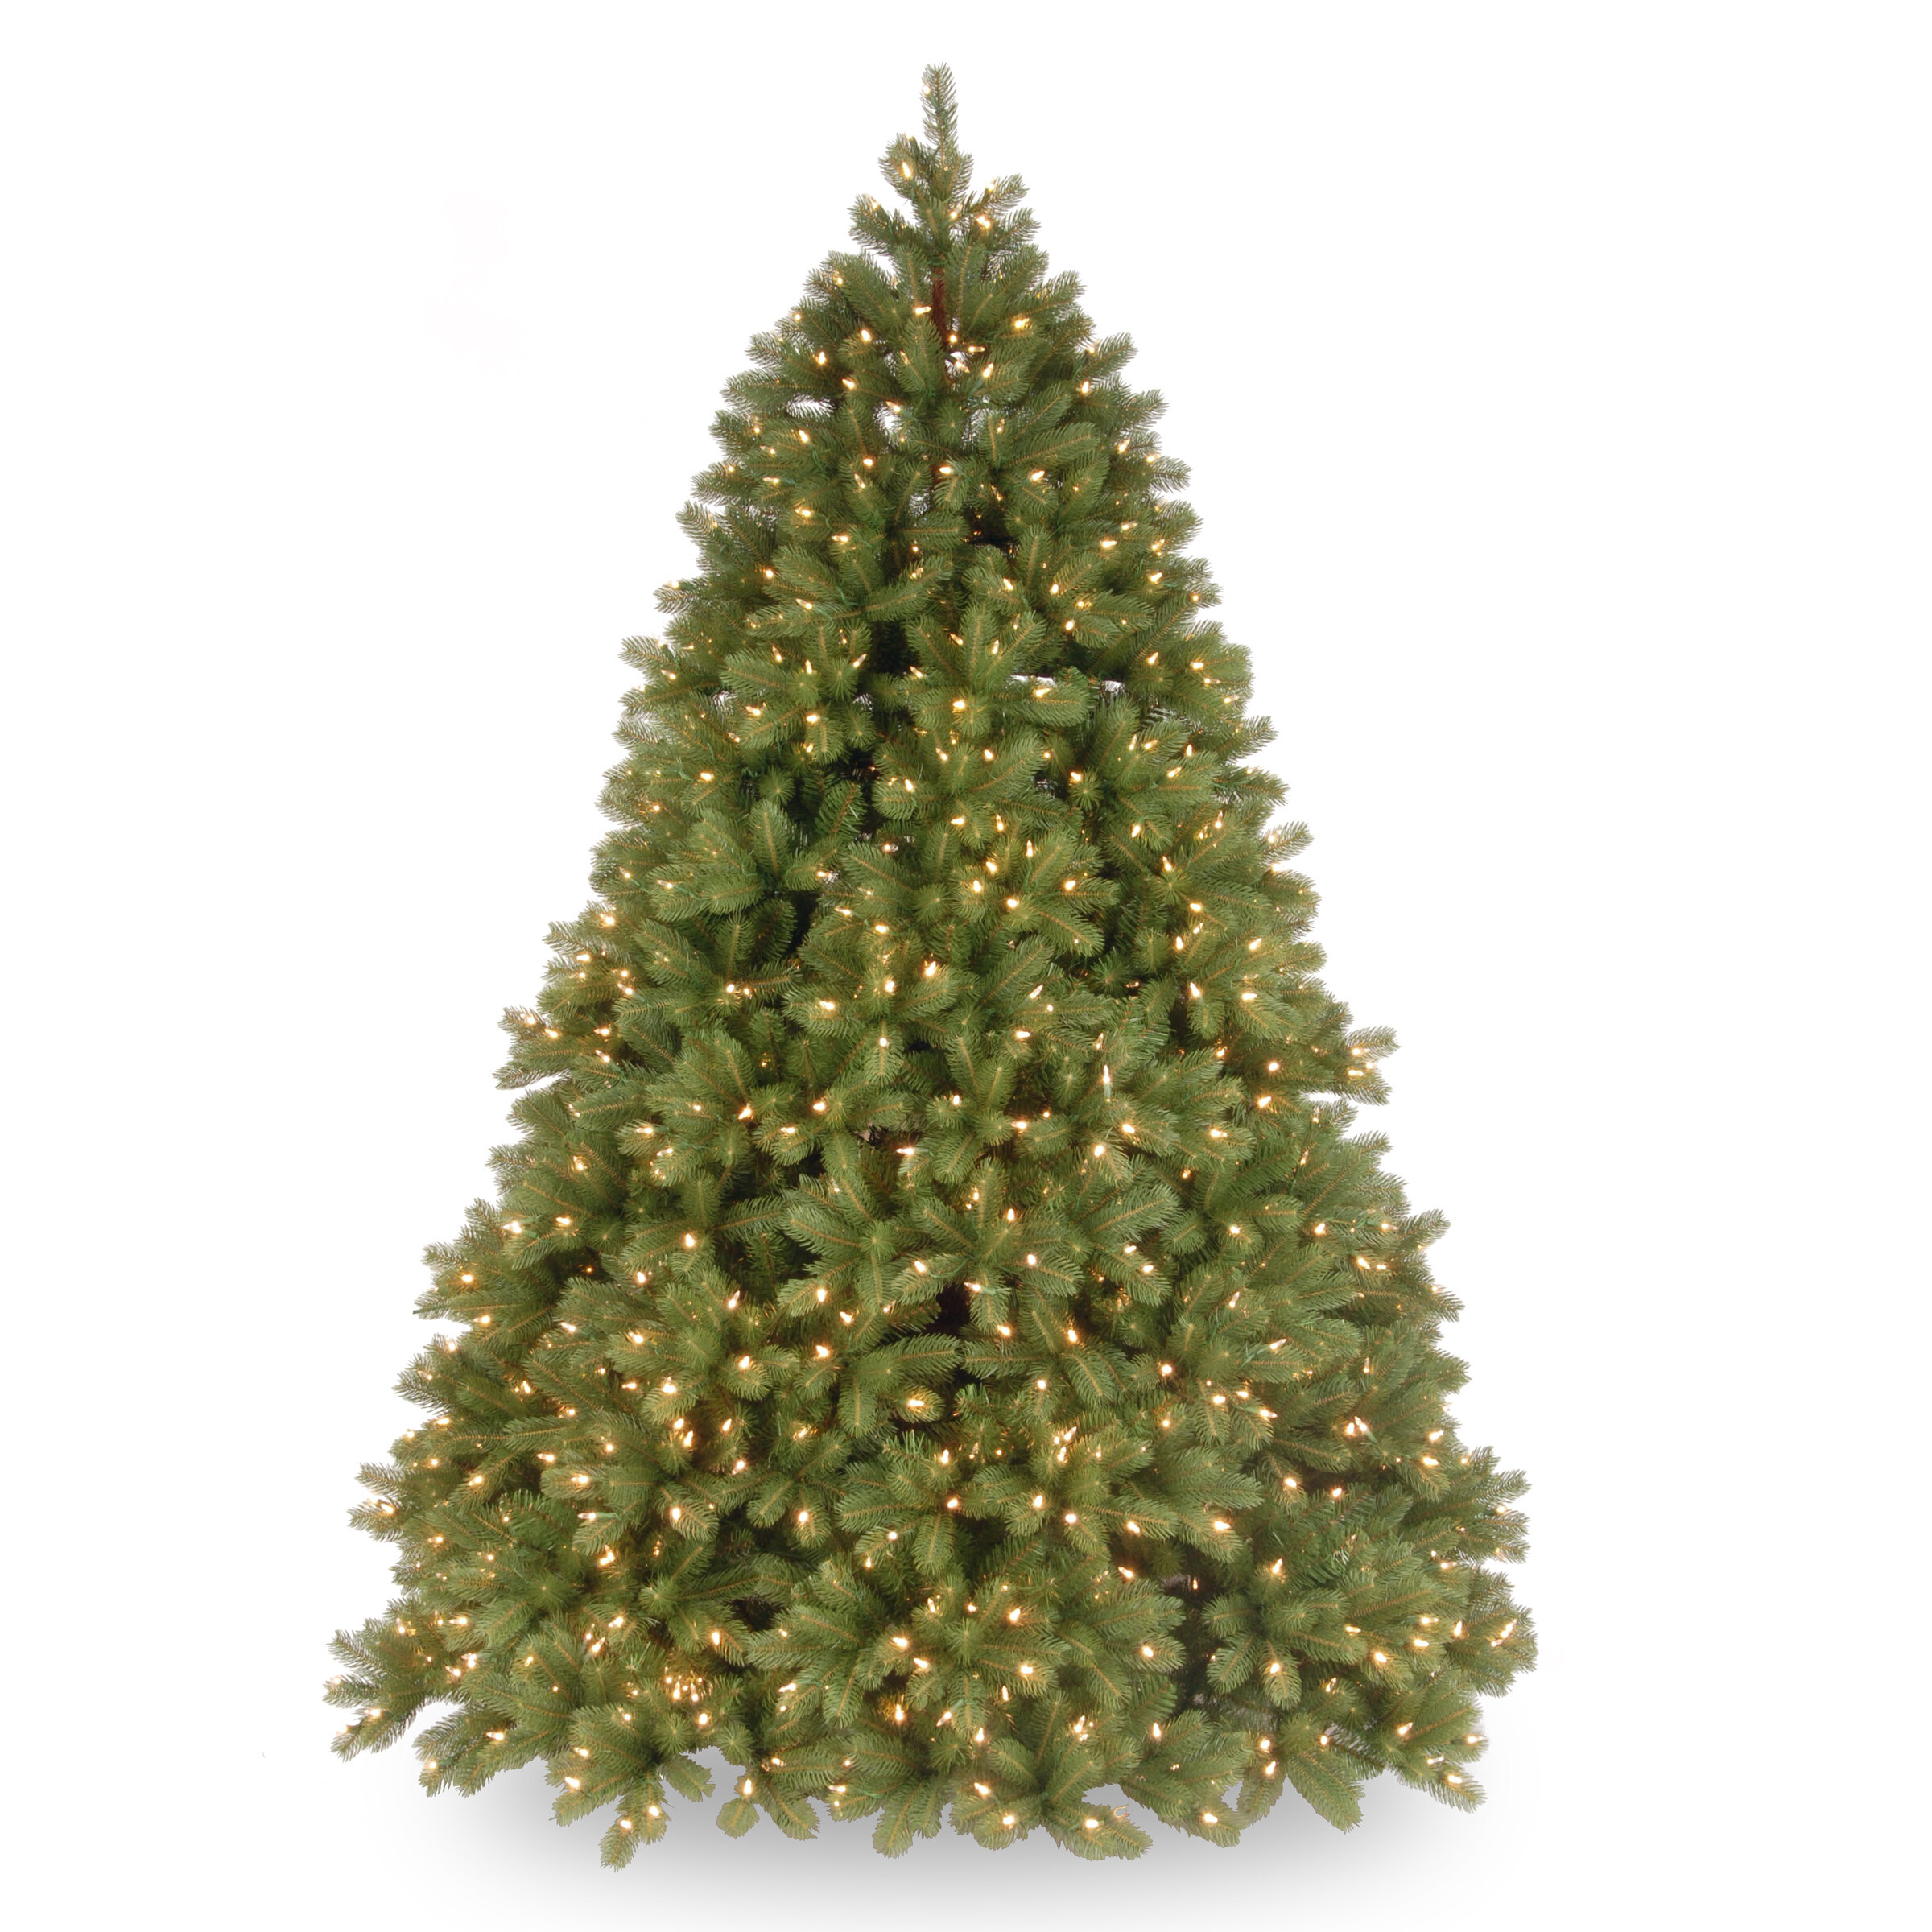 Details about   Christmas Tree Classic Green Half Wall Height 180h show original title 